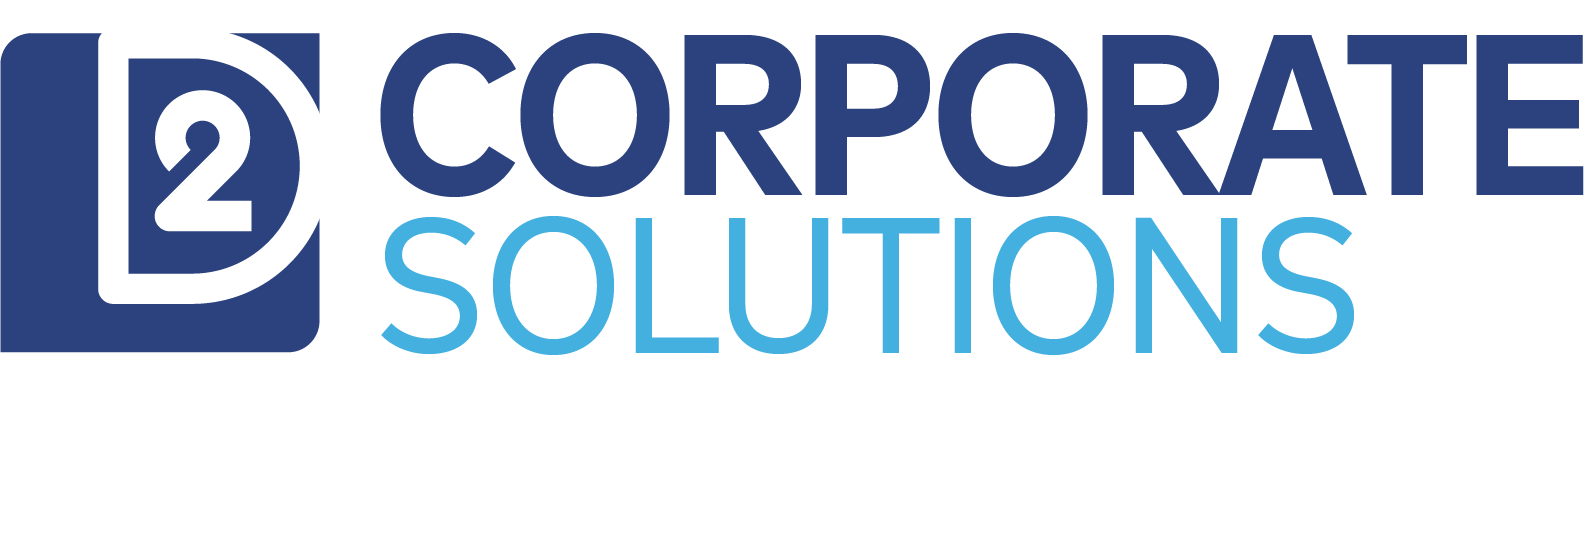 D2 Corporate Solutions